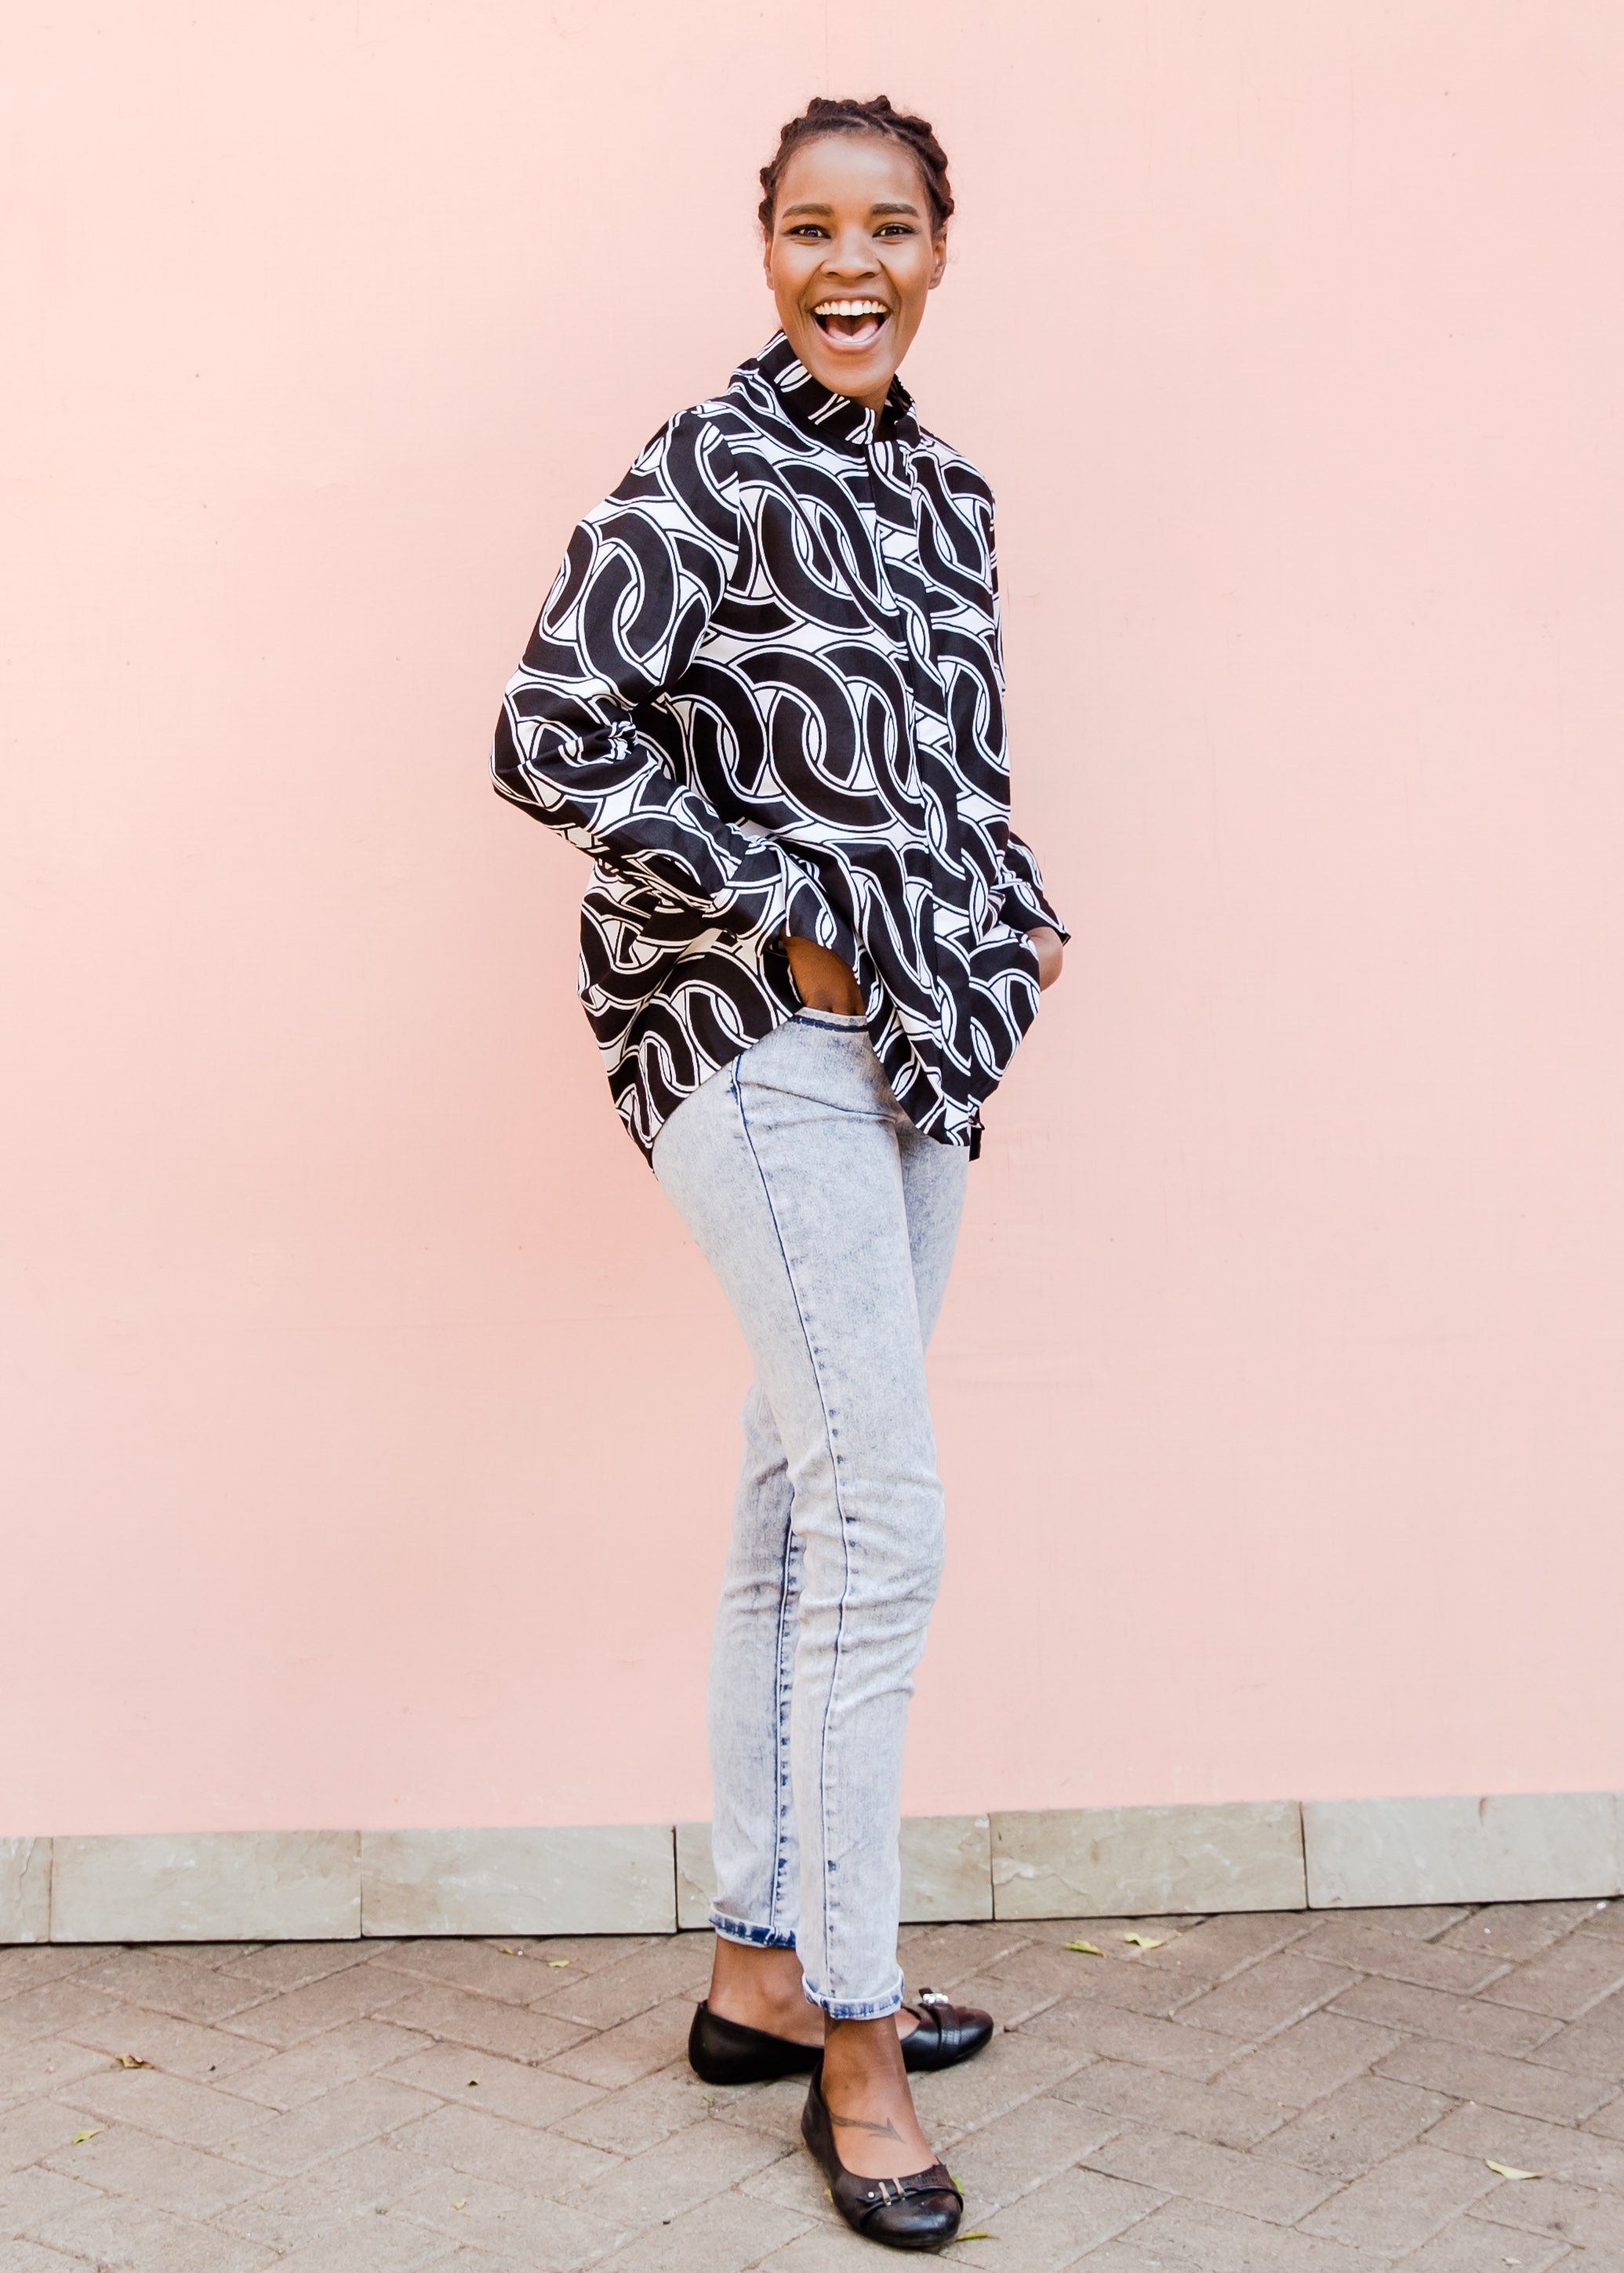 Model wearing black and white chain print shirt over jeans.